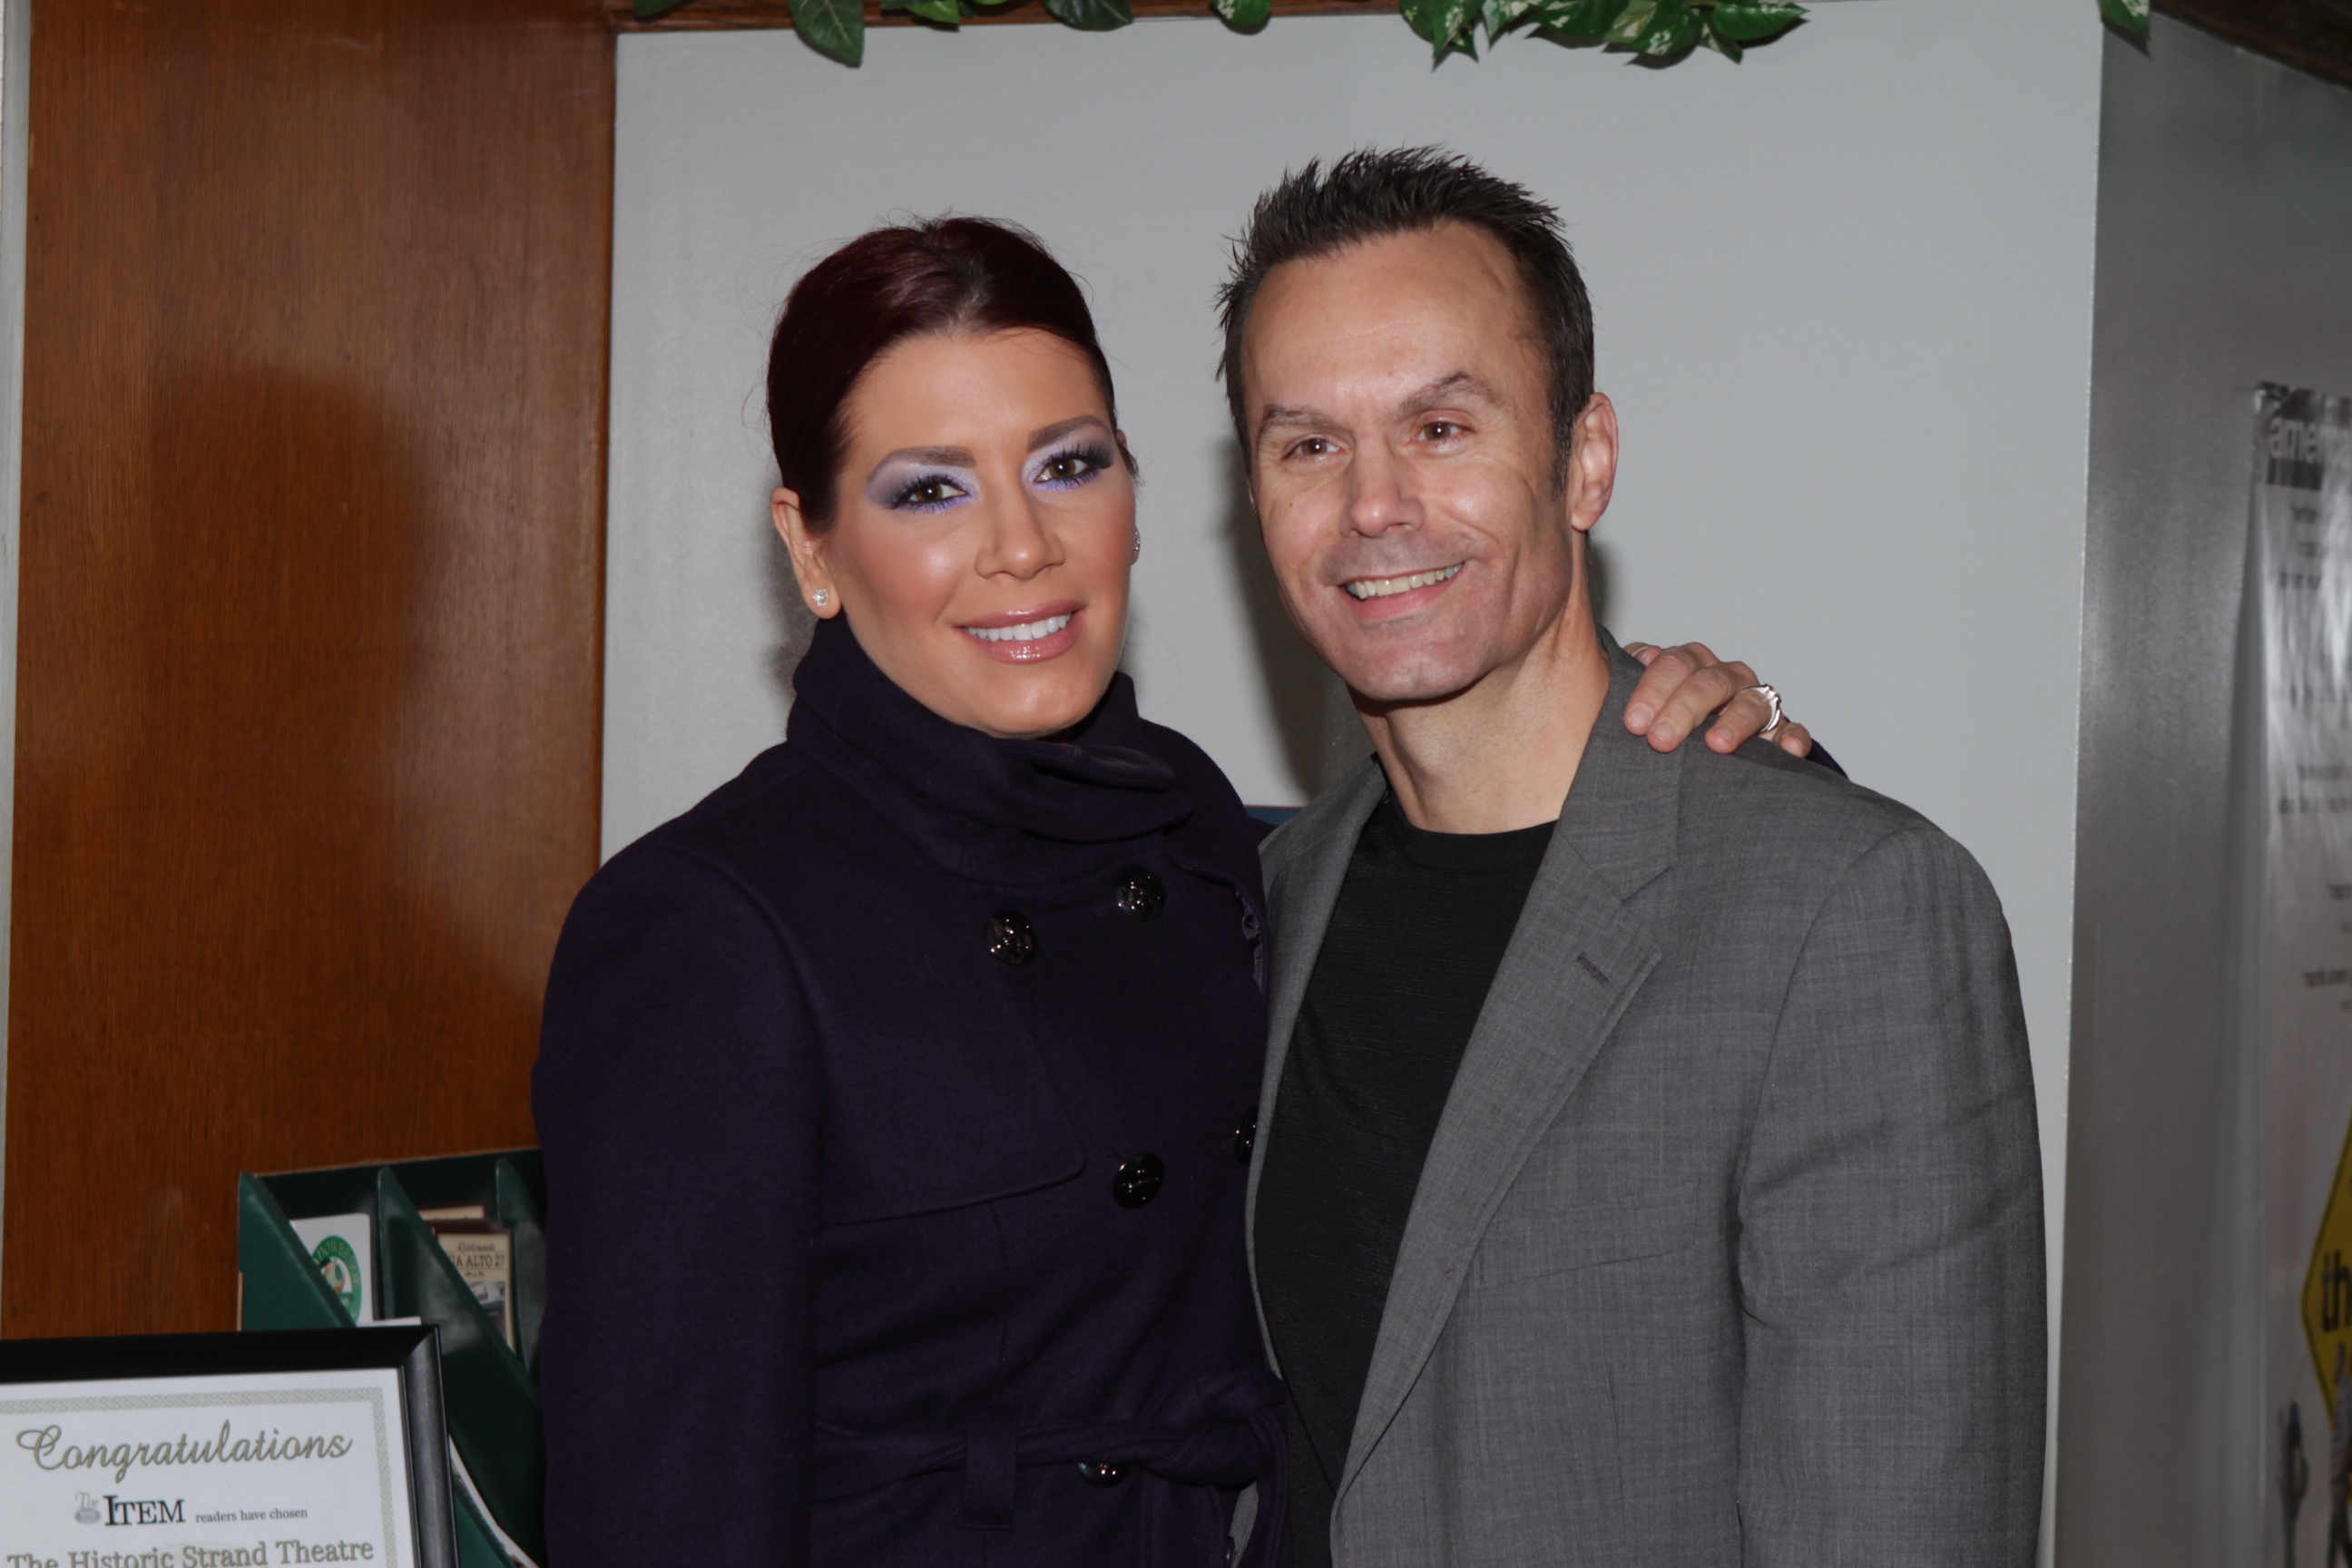 Mark Lund at the world premiere of Justice Is Mind: Evidence with makeup artist Monique Mercogliano-Battista.